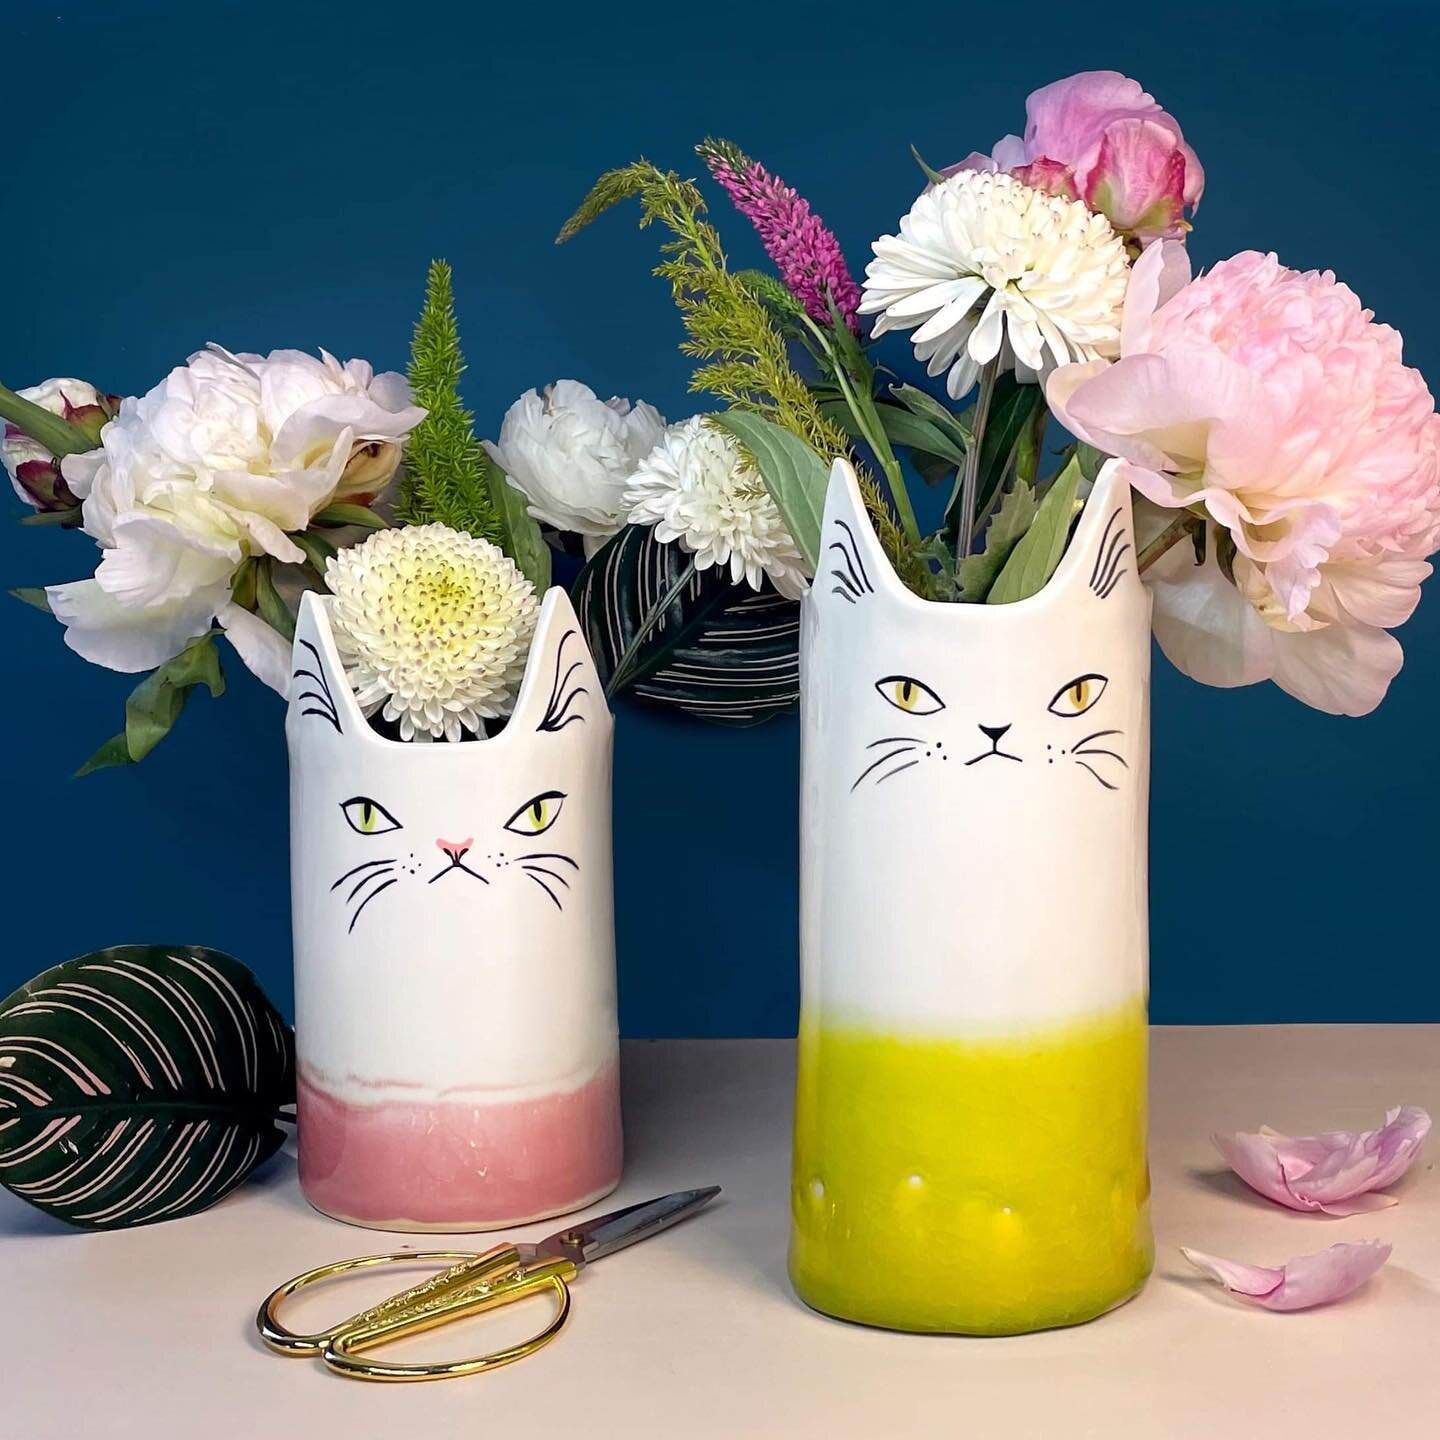 Cat vases with dipped glazed bottoms.

I&rsquo;ll be making more of these in October once my slab roller gets delivered 🫶

I&rsquo;ve also been transitioning away from Etsy to launch my new shop website, I&rsquo;m excited to share this with you soon